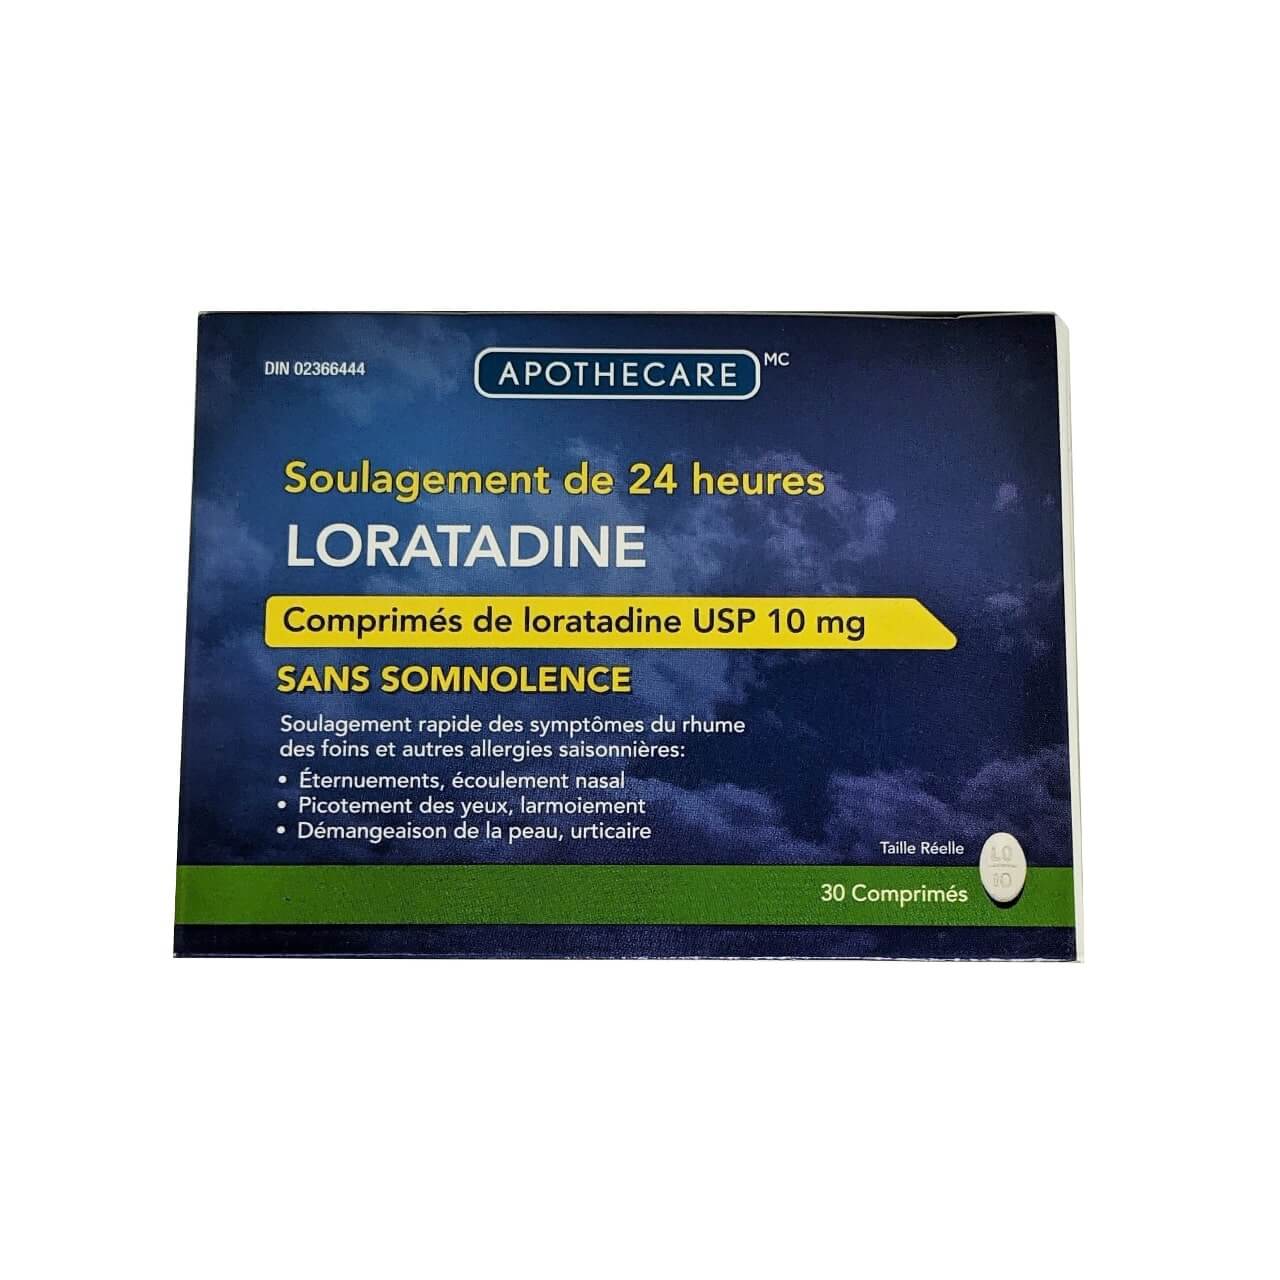 Product package for Apothecare Non Drowsy Allergy Relief Loratadine 10mg in French